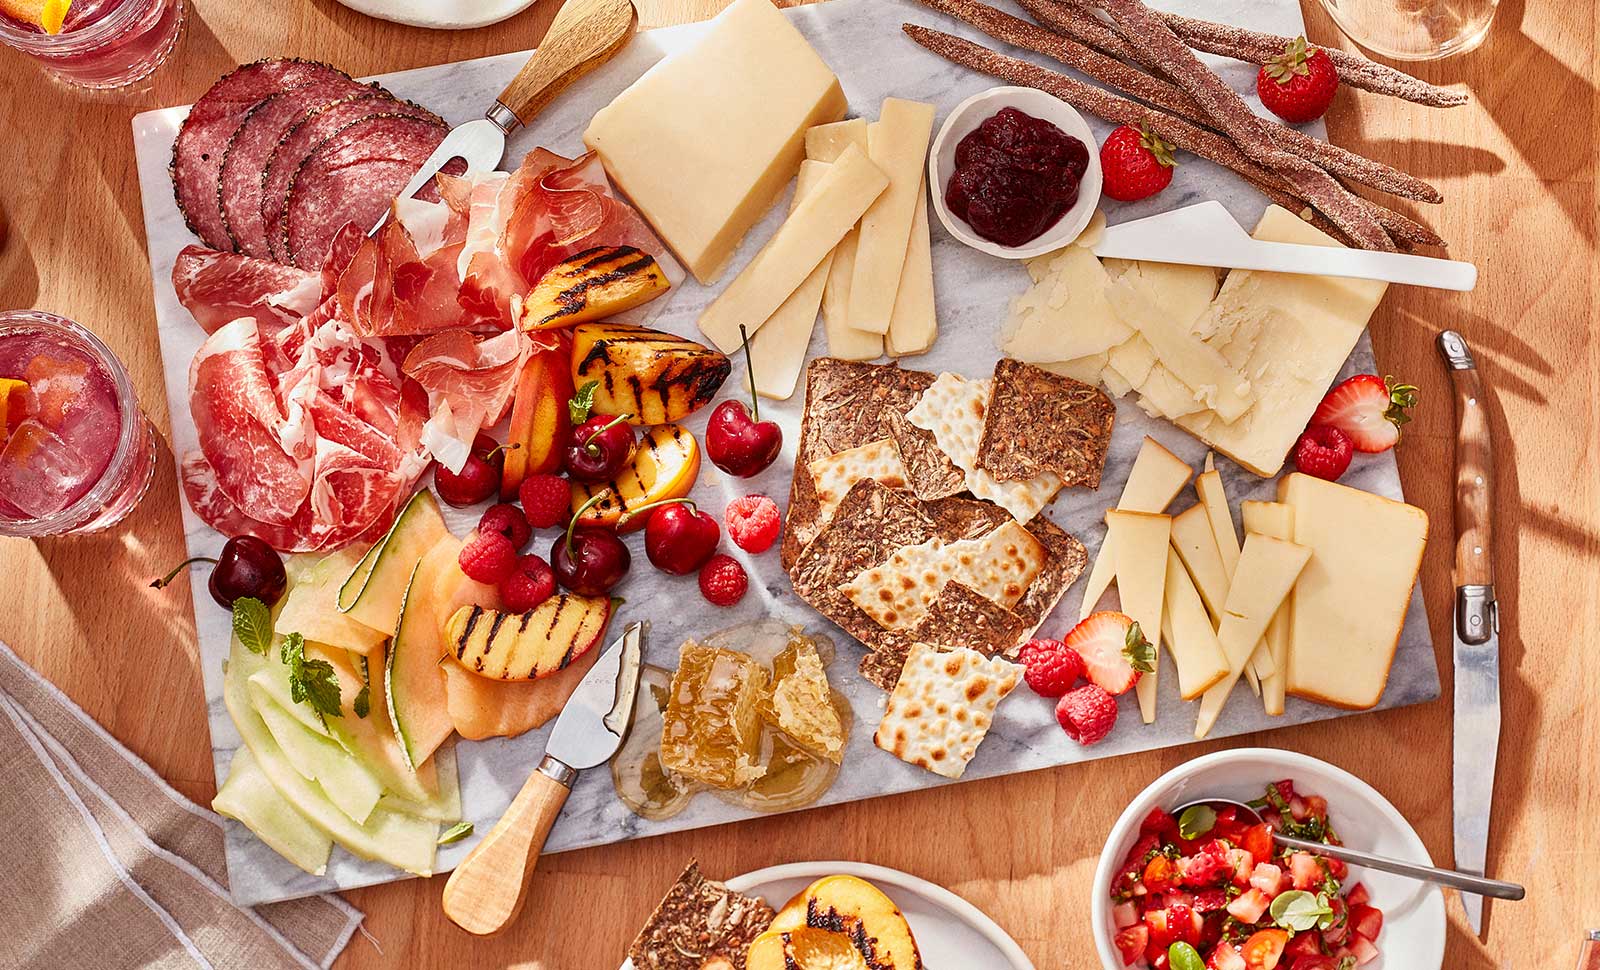 A summer inspired charcuterie board with aged cheddars, slices of salami and prosciutto, crackers, raspberries and cherries.